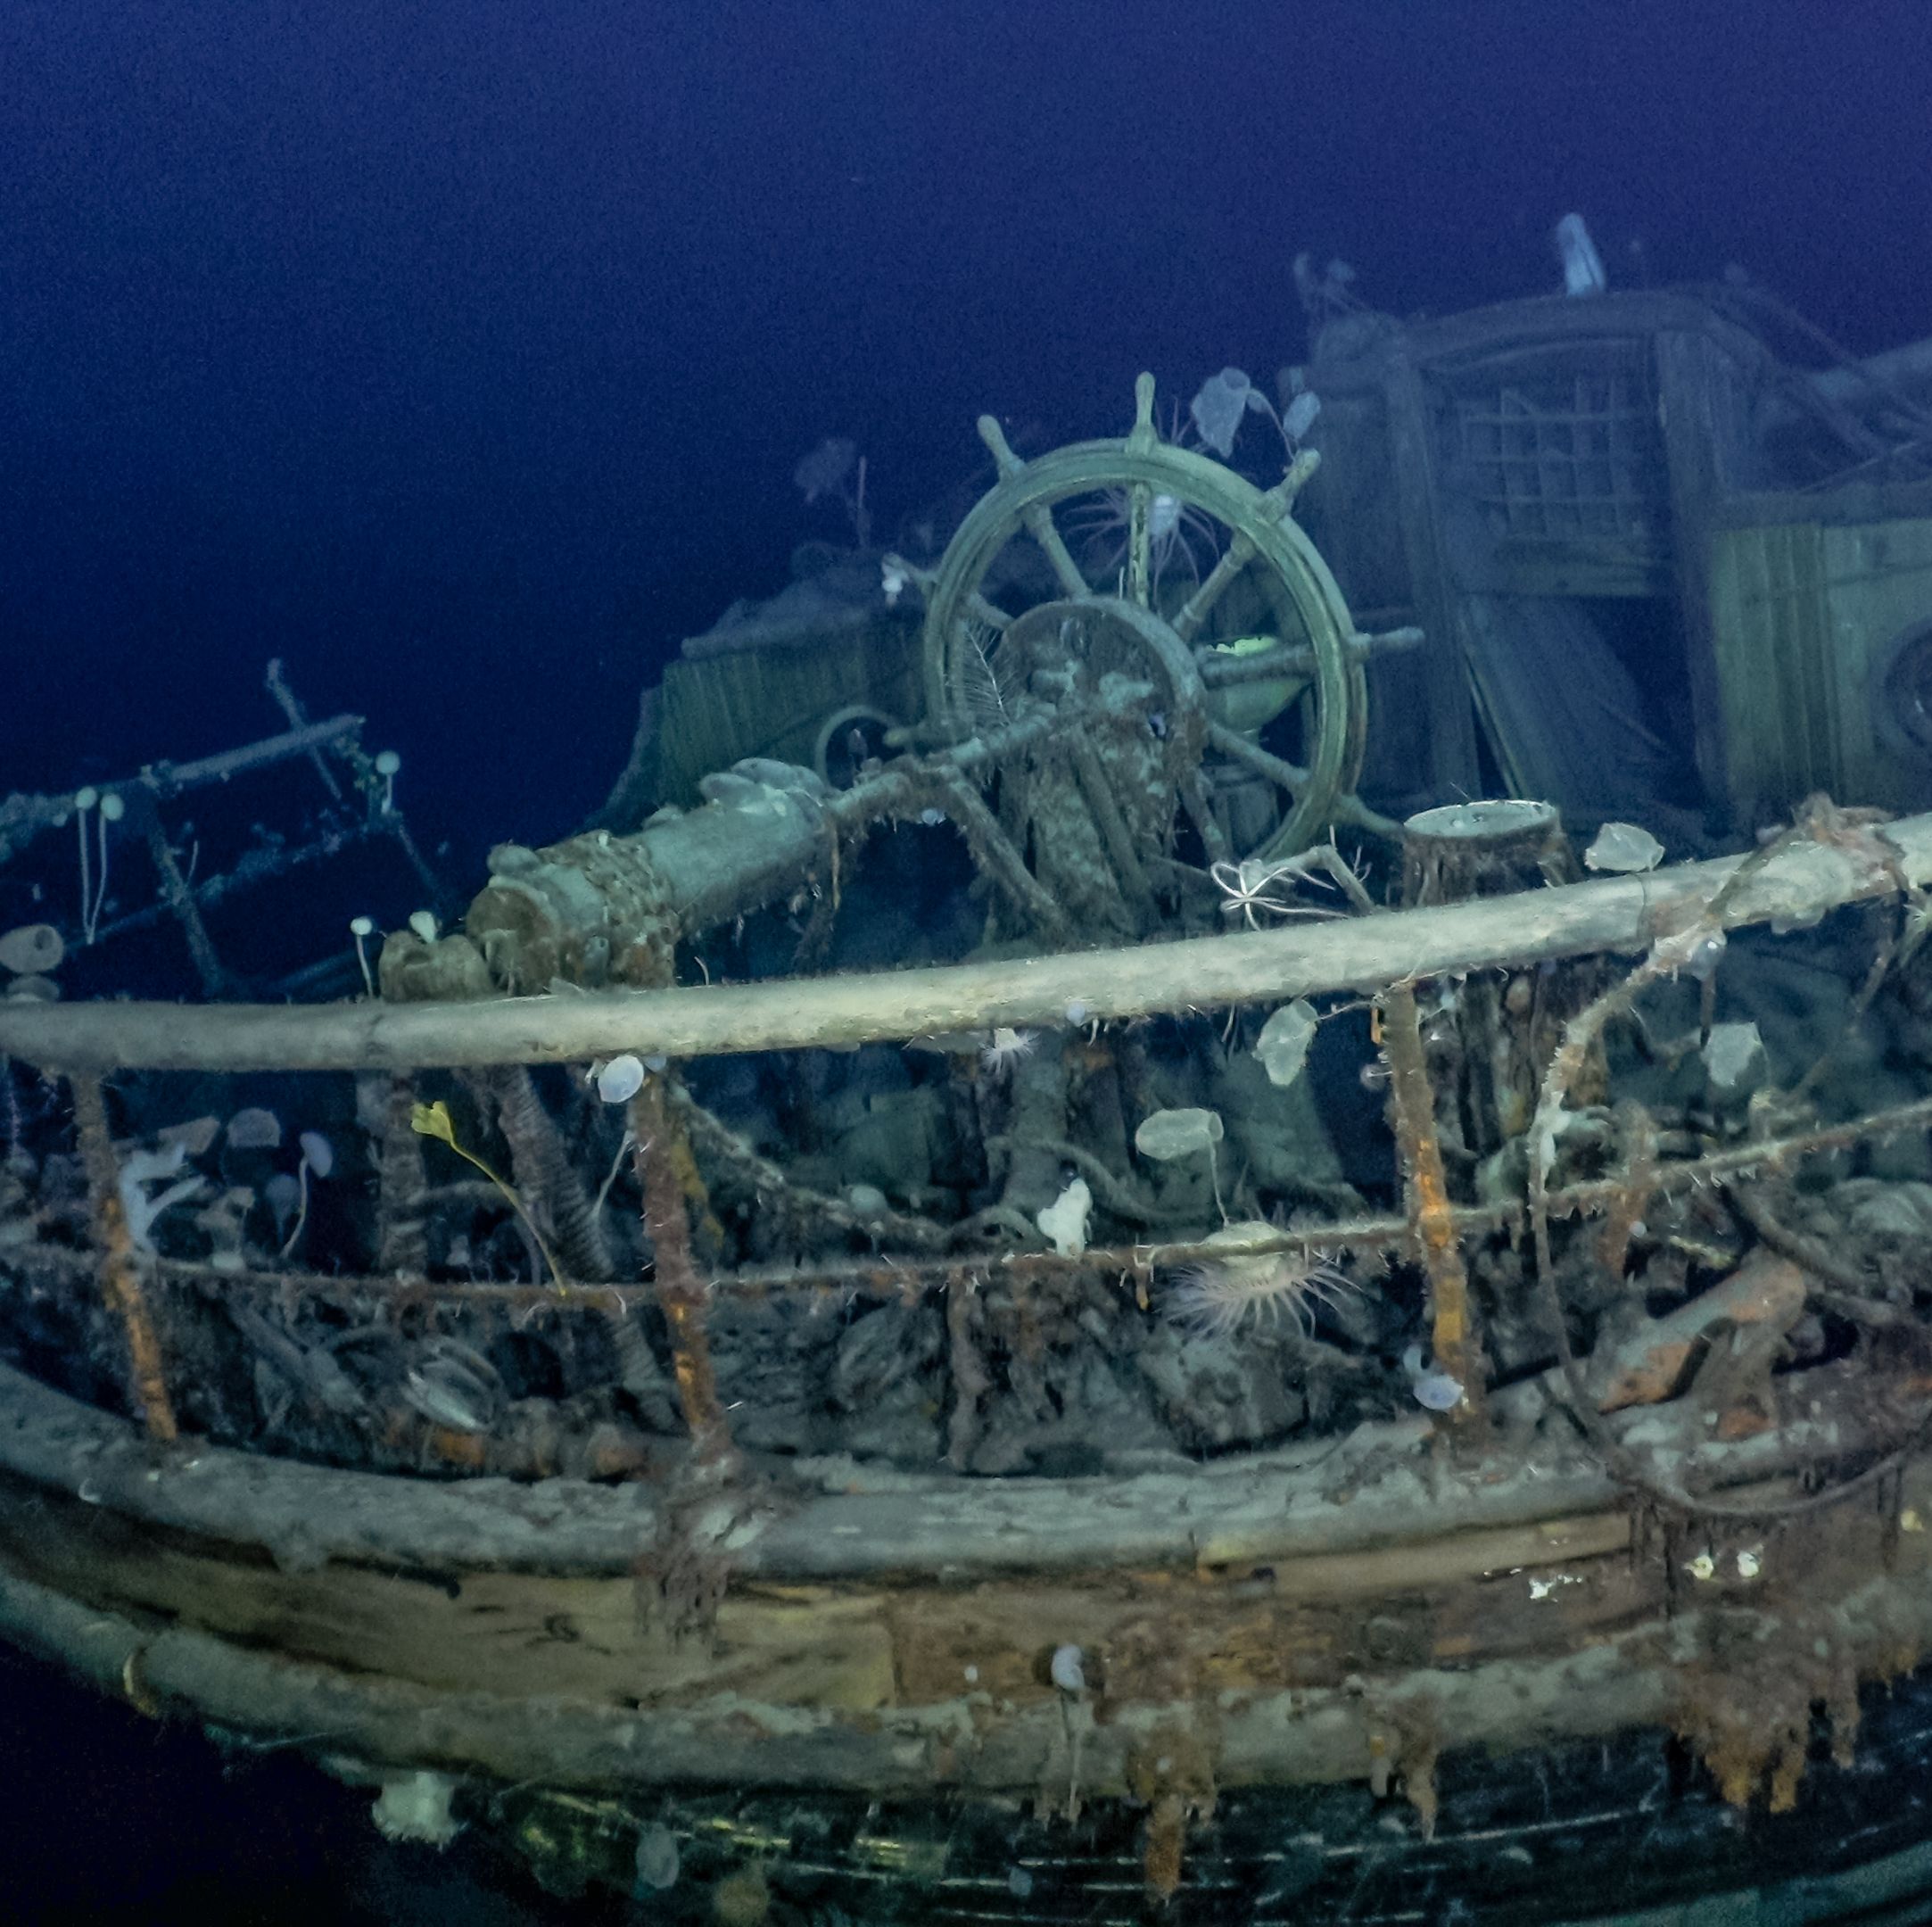 After 106 Years, A Famous Polar Expedition Ship is Found in Remarkable Condition